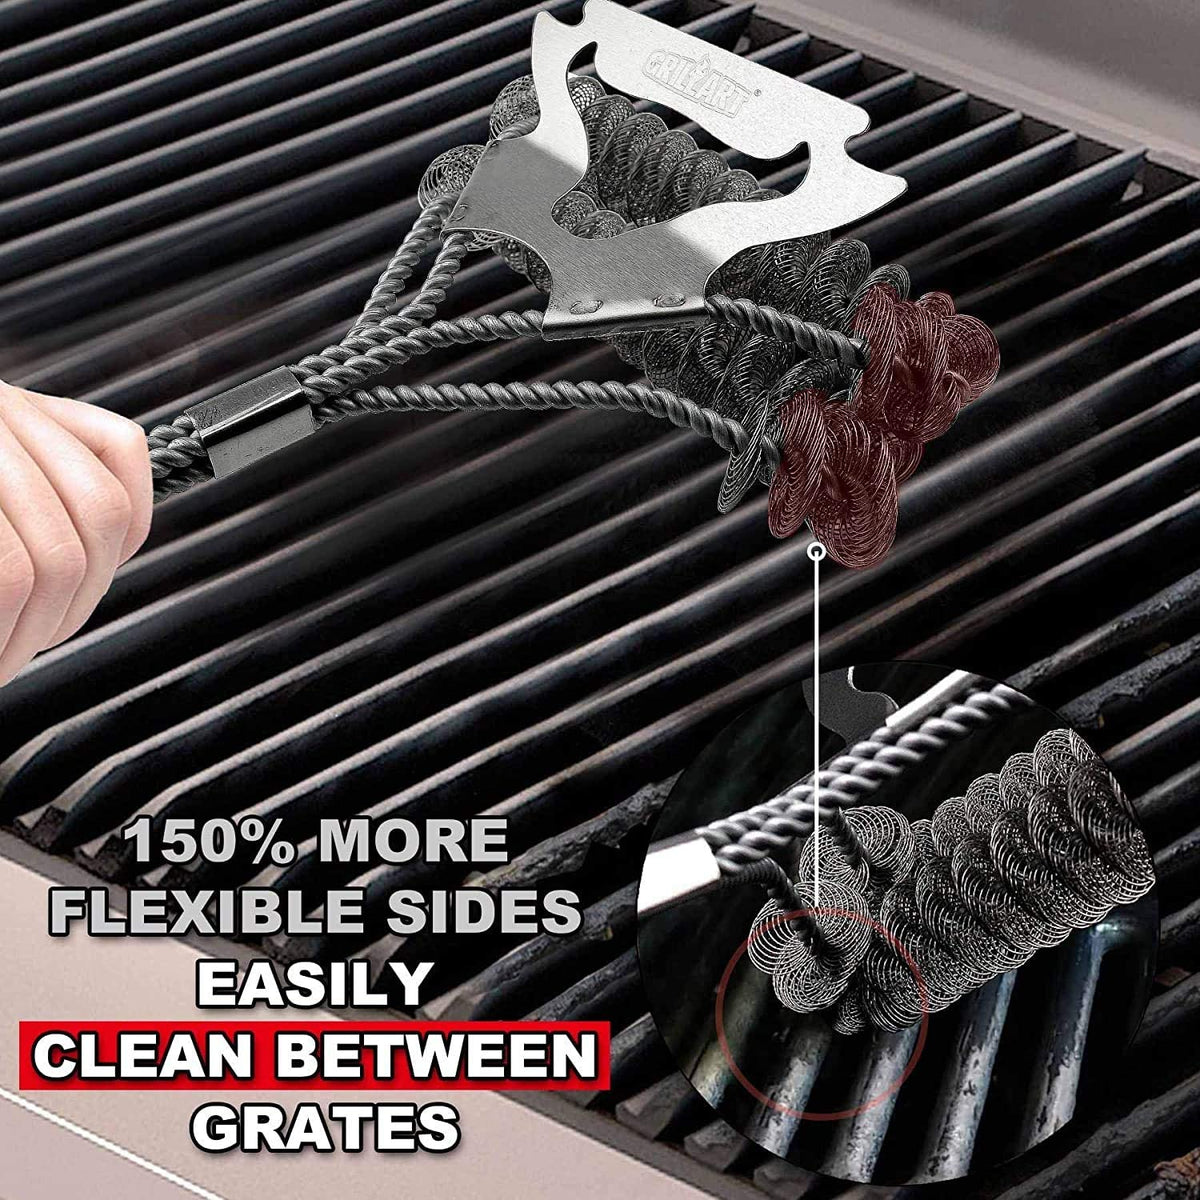 How to Use a Grill Brush